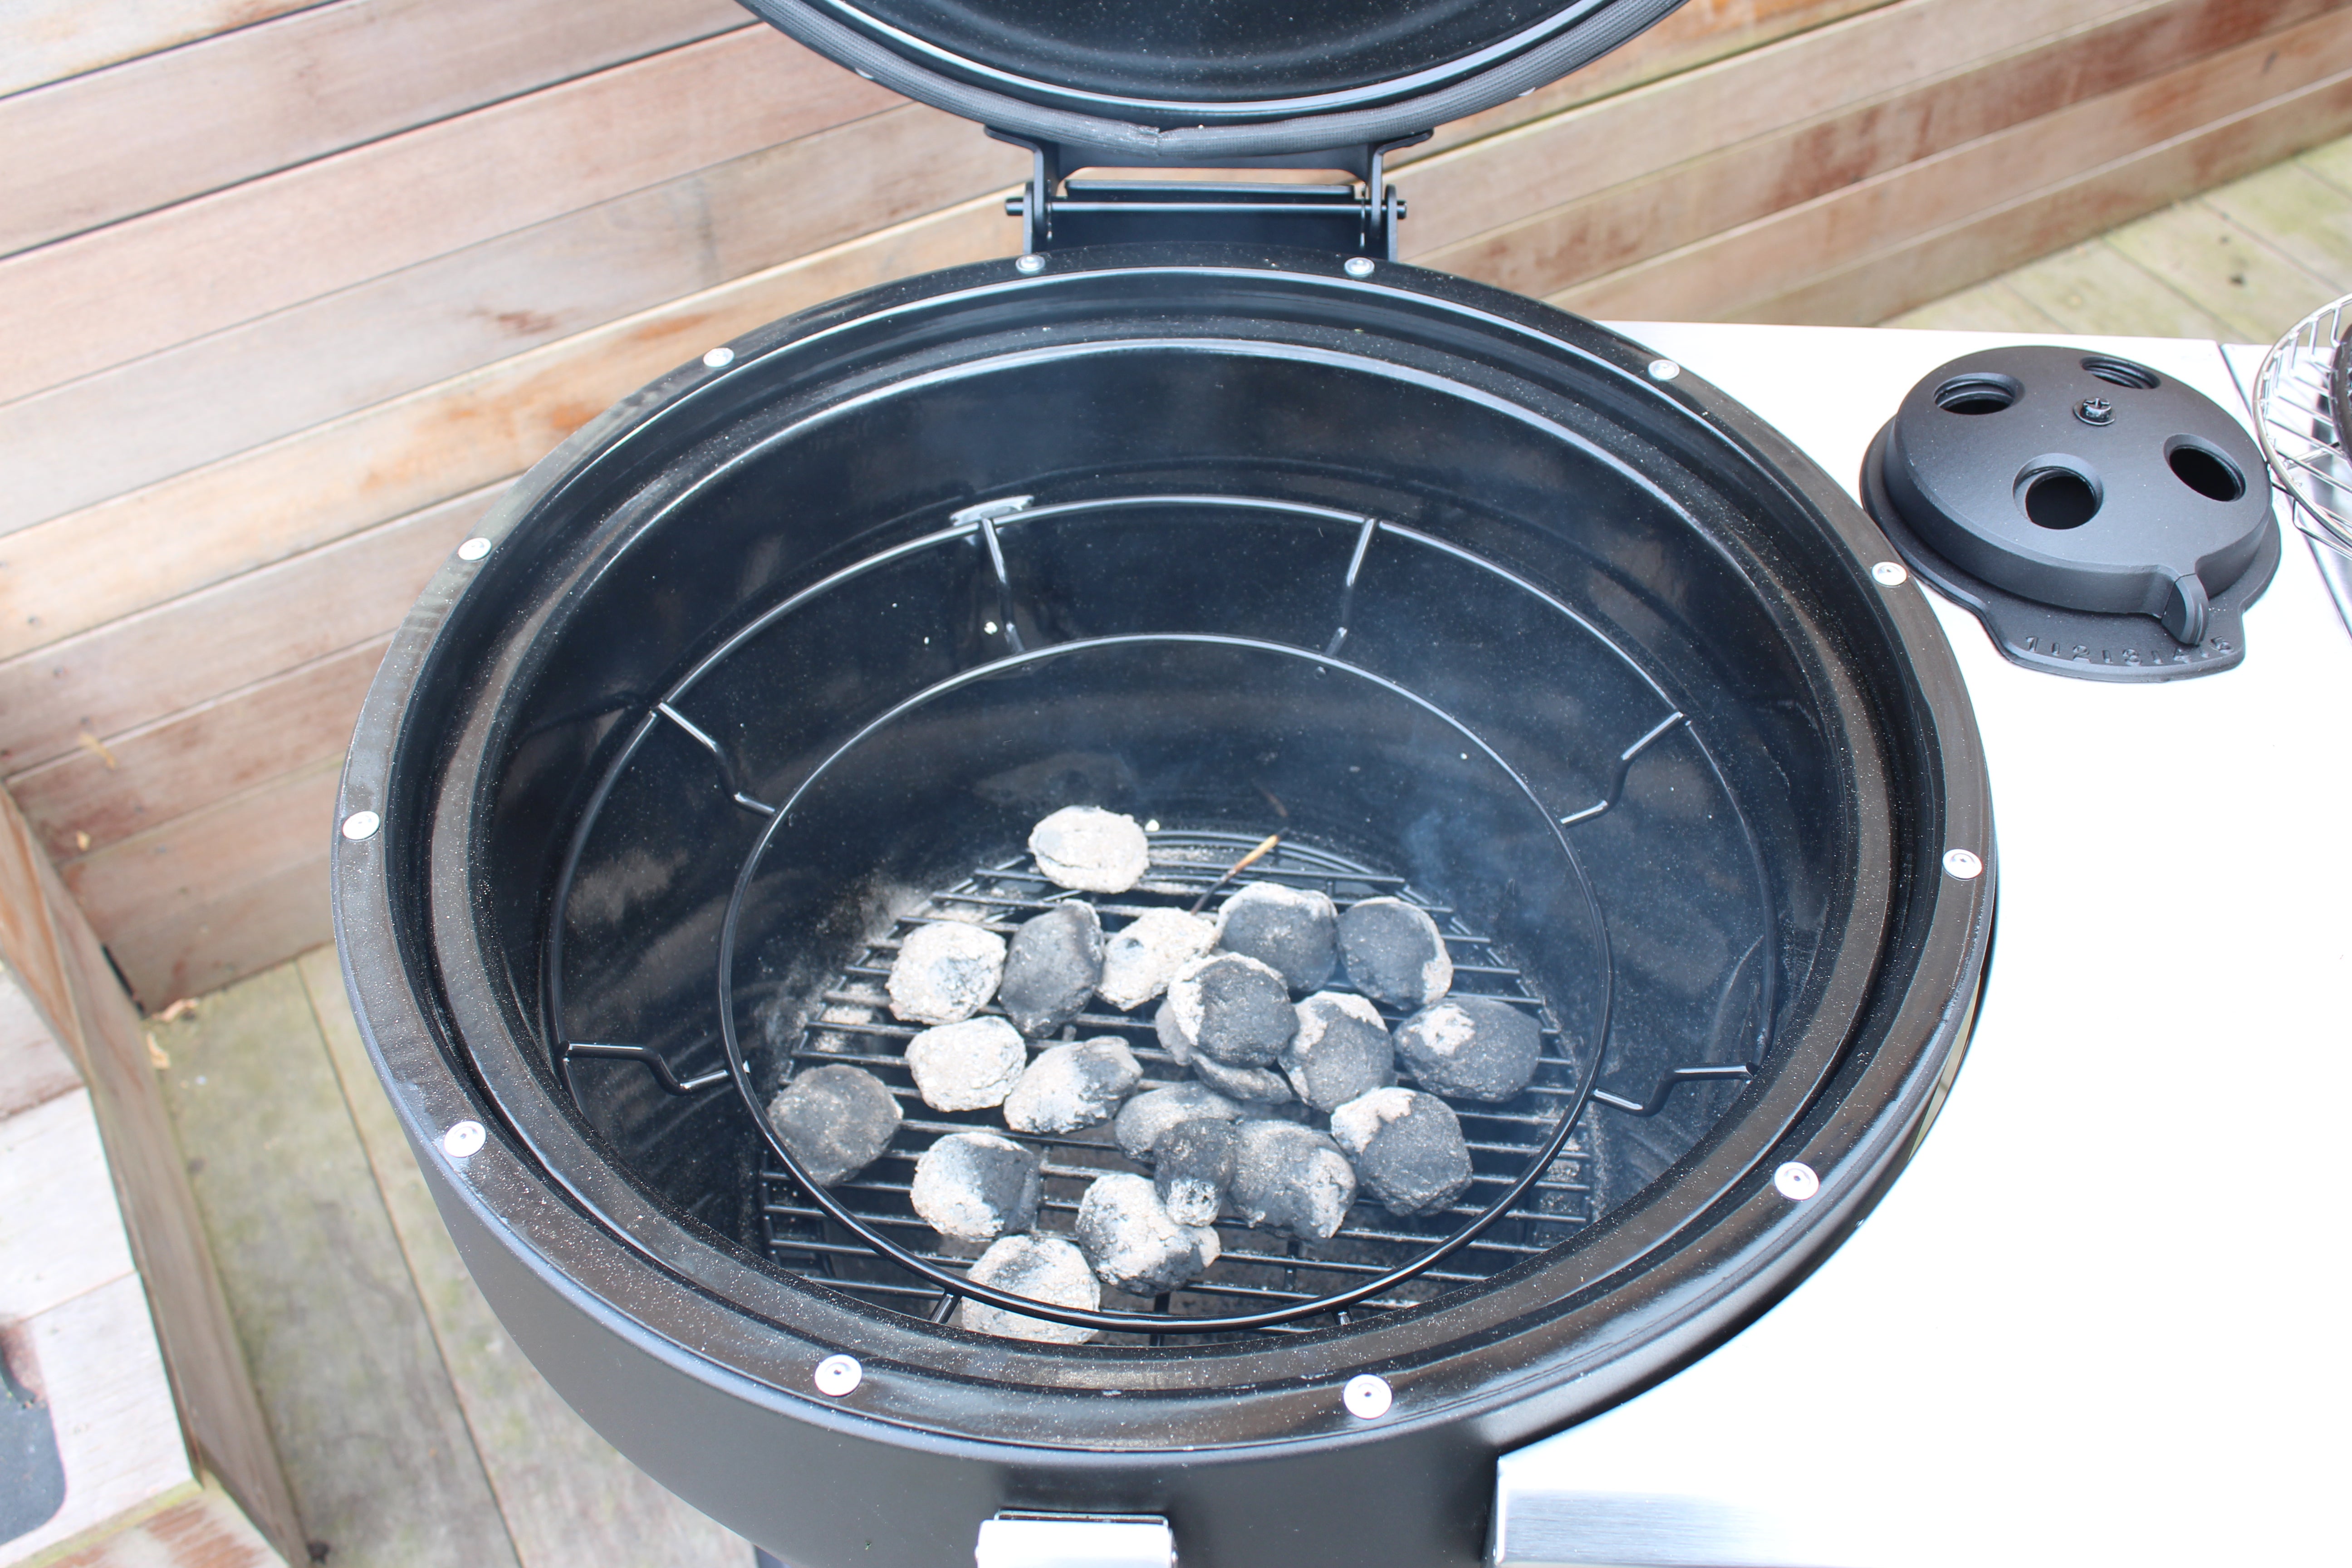 Charcoal grill interior with ash-covered coals and open lid.